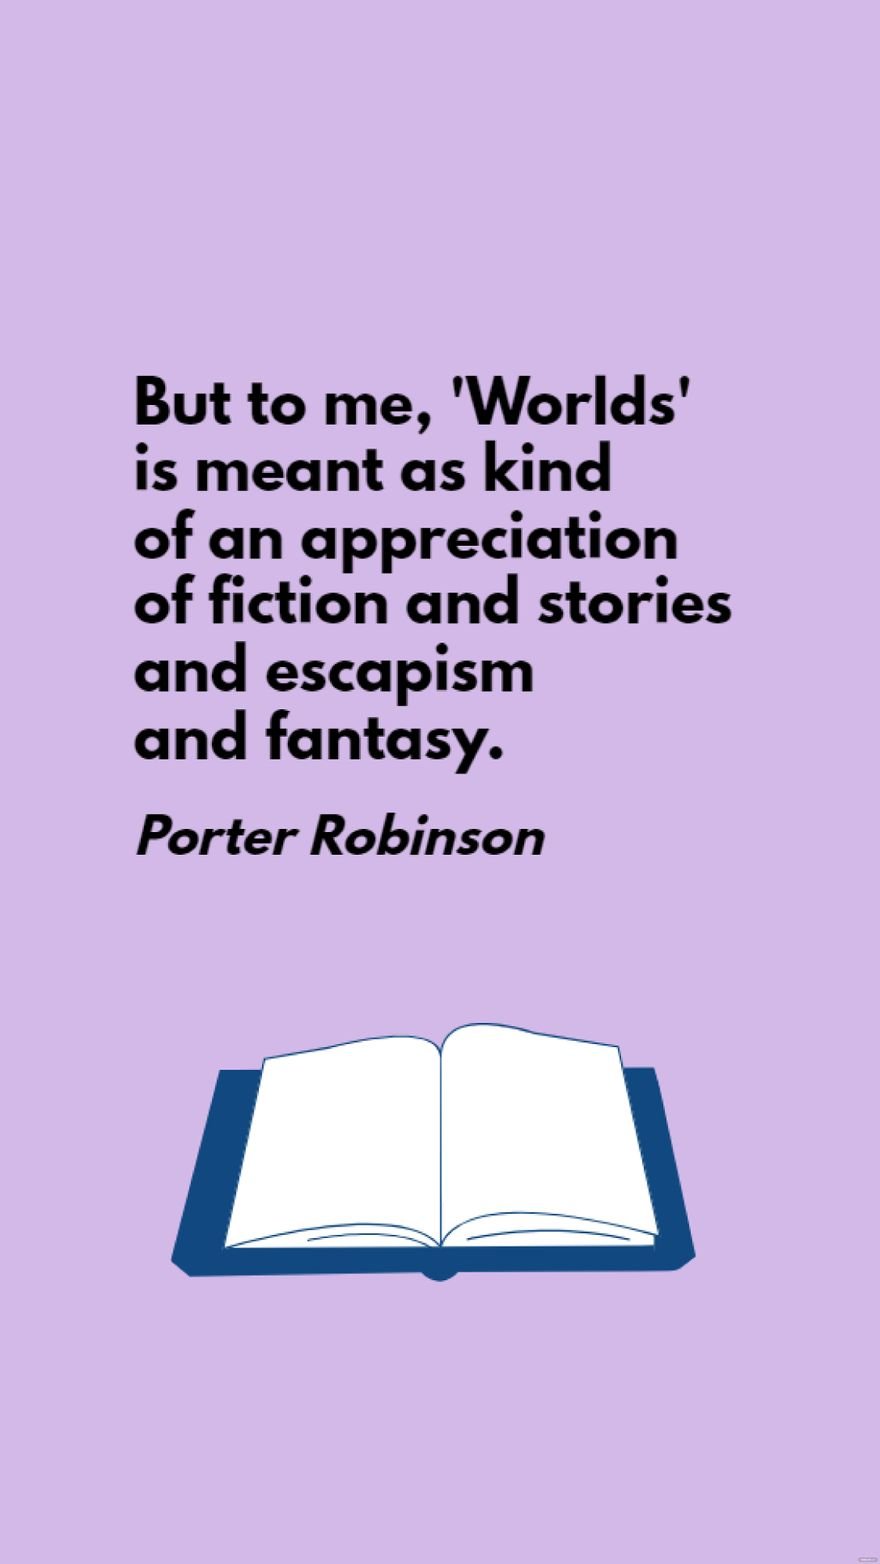 Porter Robinson - But to me, 'Worlds' is meant as kind of an appreciation of fiction and stories and escapism and fantasy. in JPG